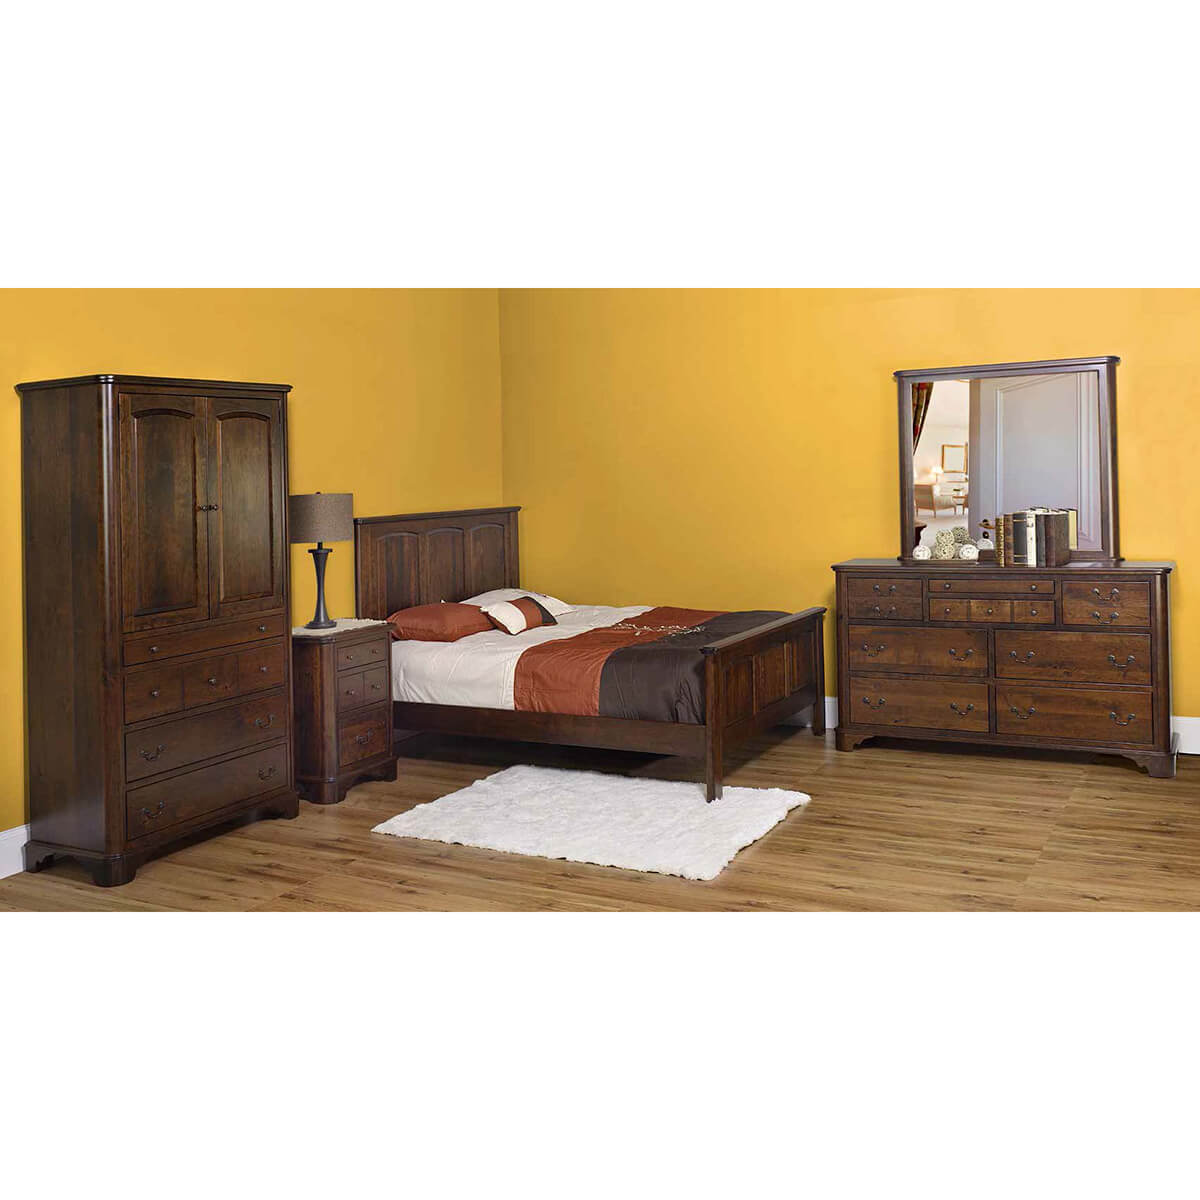 TuscanyBedroomCollection137407